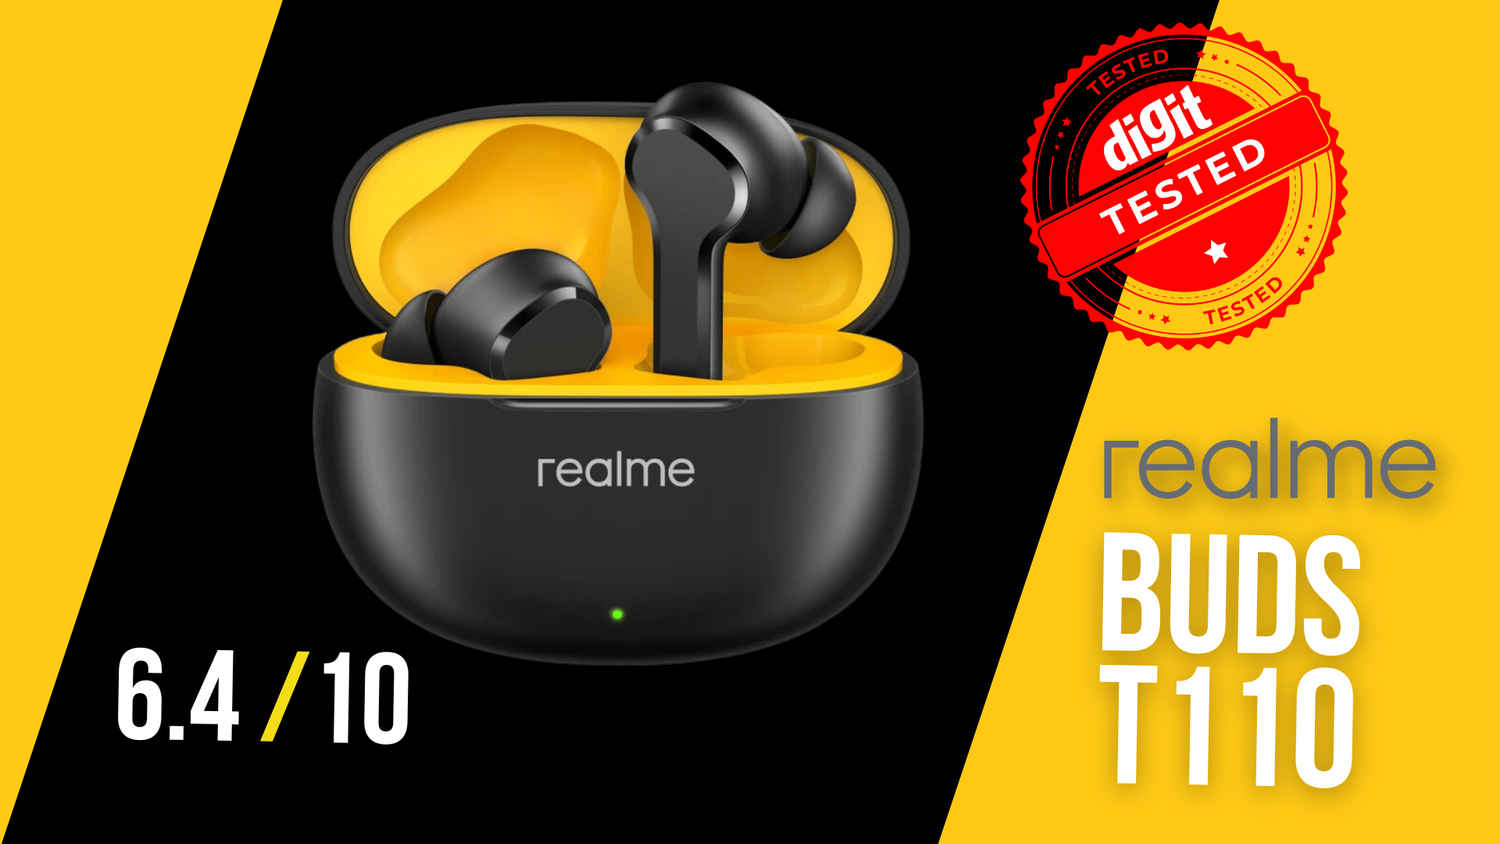 realme Buds T110 Review – Solid in-ear earphones for the price